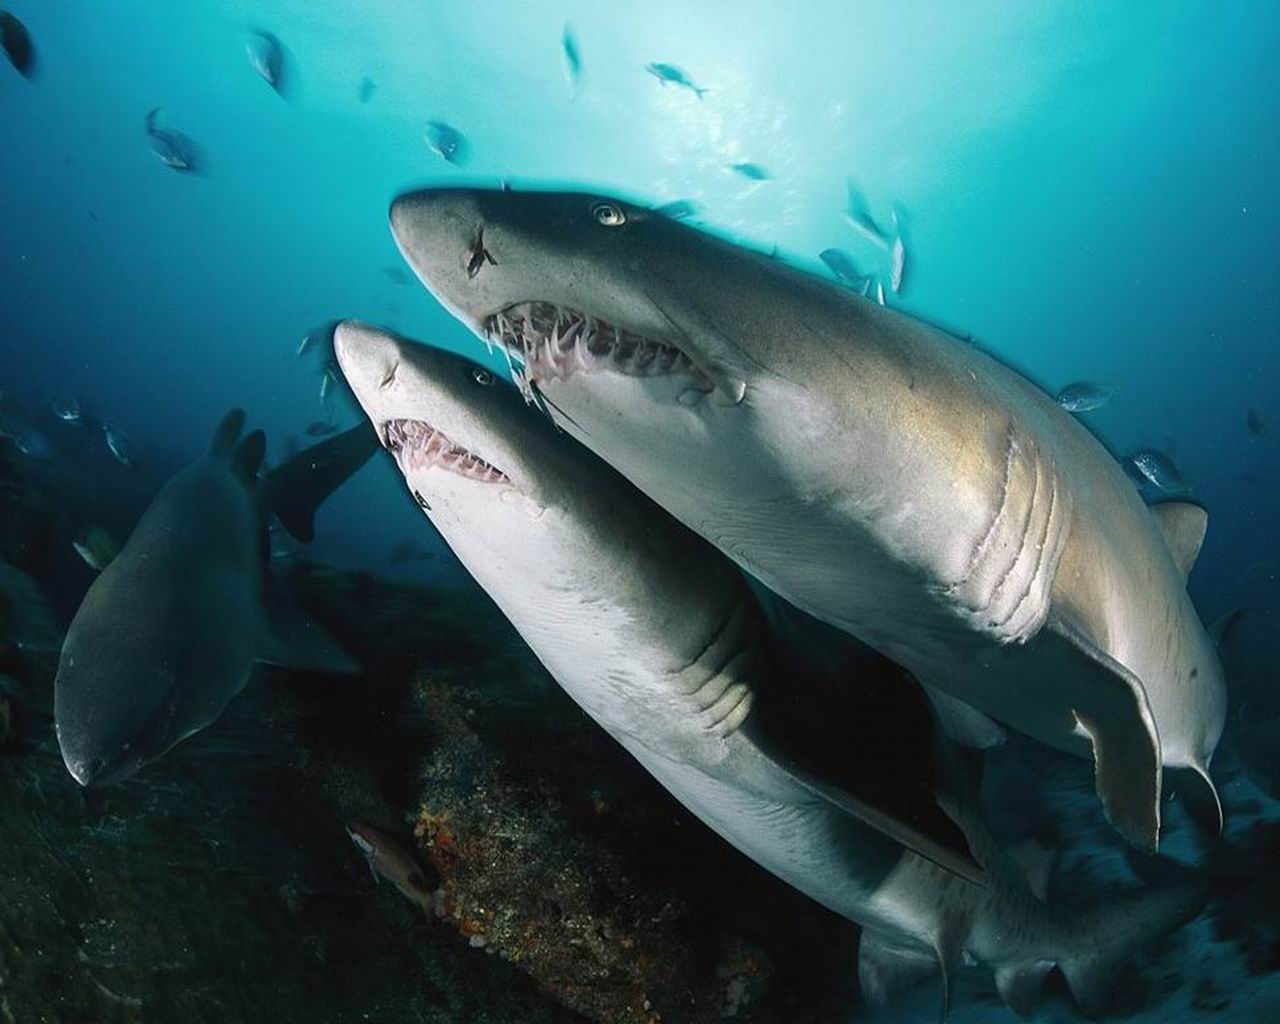 Download High quality Sharks Underwater wallpaper / 1280x1024